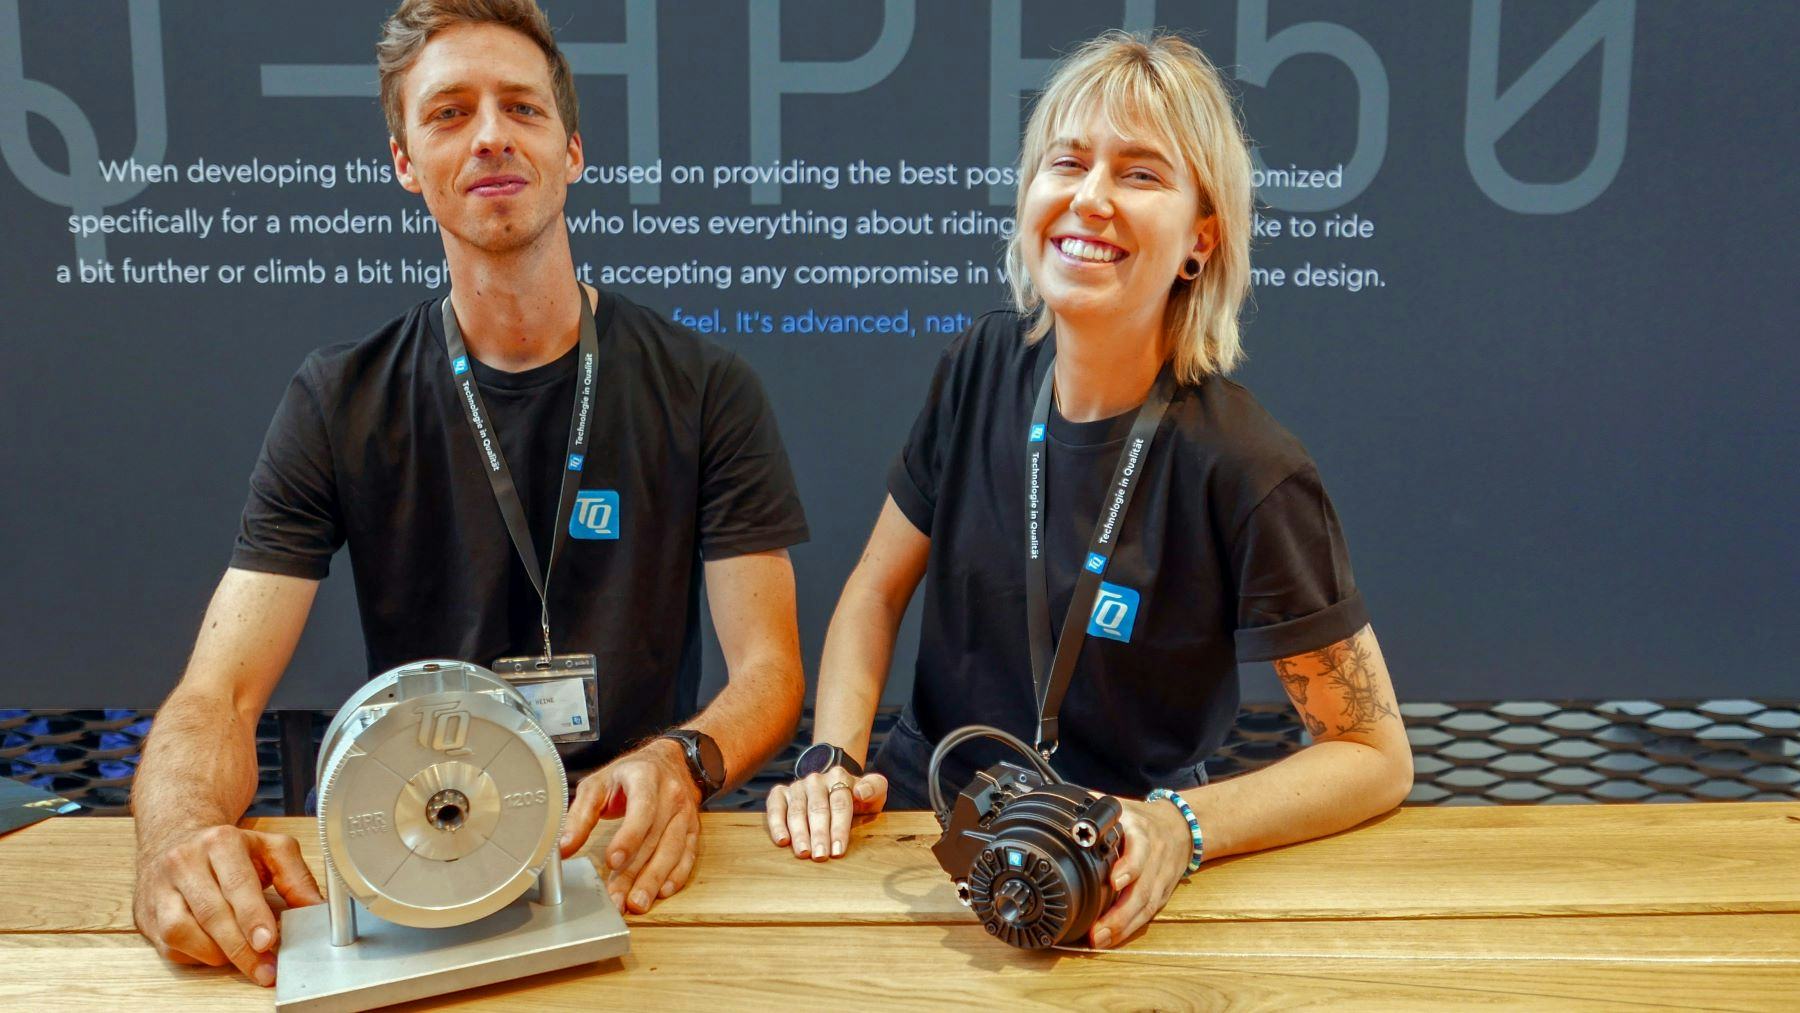 Presenting the ‘old’ and new mid-motor: TQ Systems key account manager e-mobility, Felix Heine and product marketing manager, Anna Vodickova. - Photo Jo Beckendorff